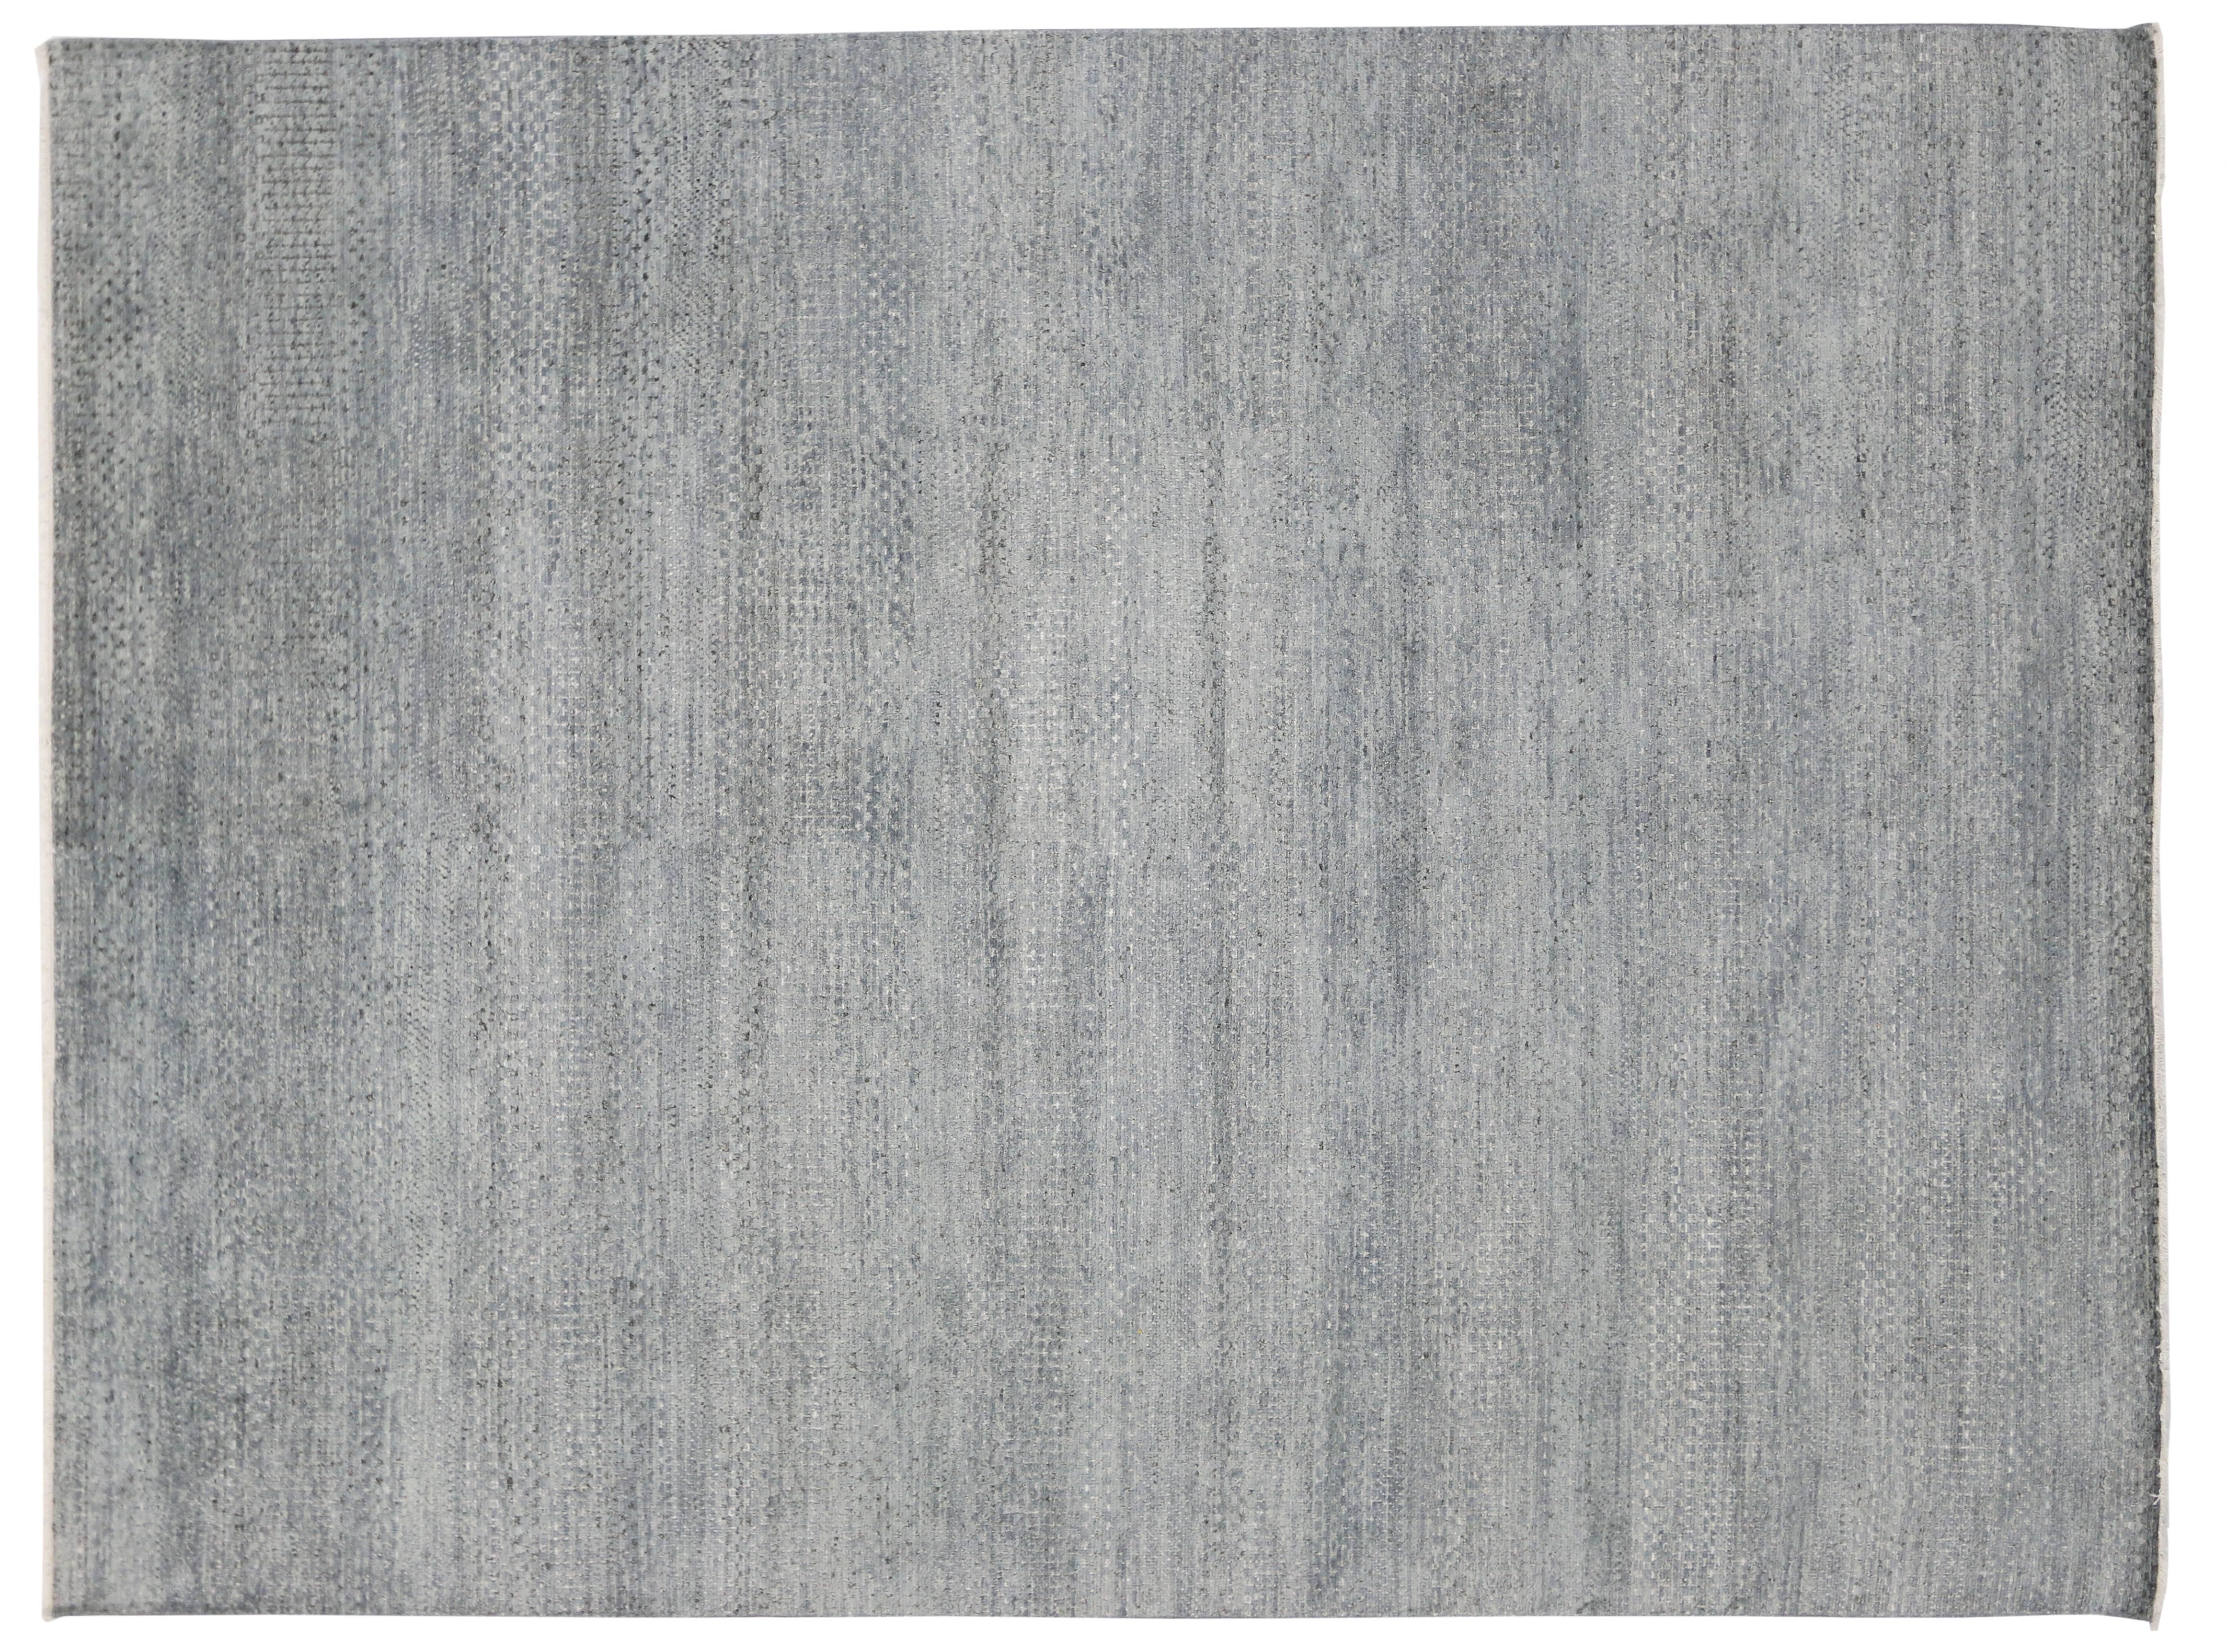 Contemporary Transitional Grass Cloth Patterned Slate Blue Area Rug with Modern Style